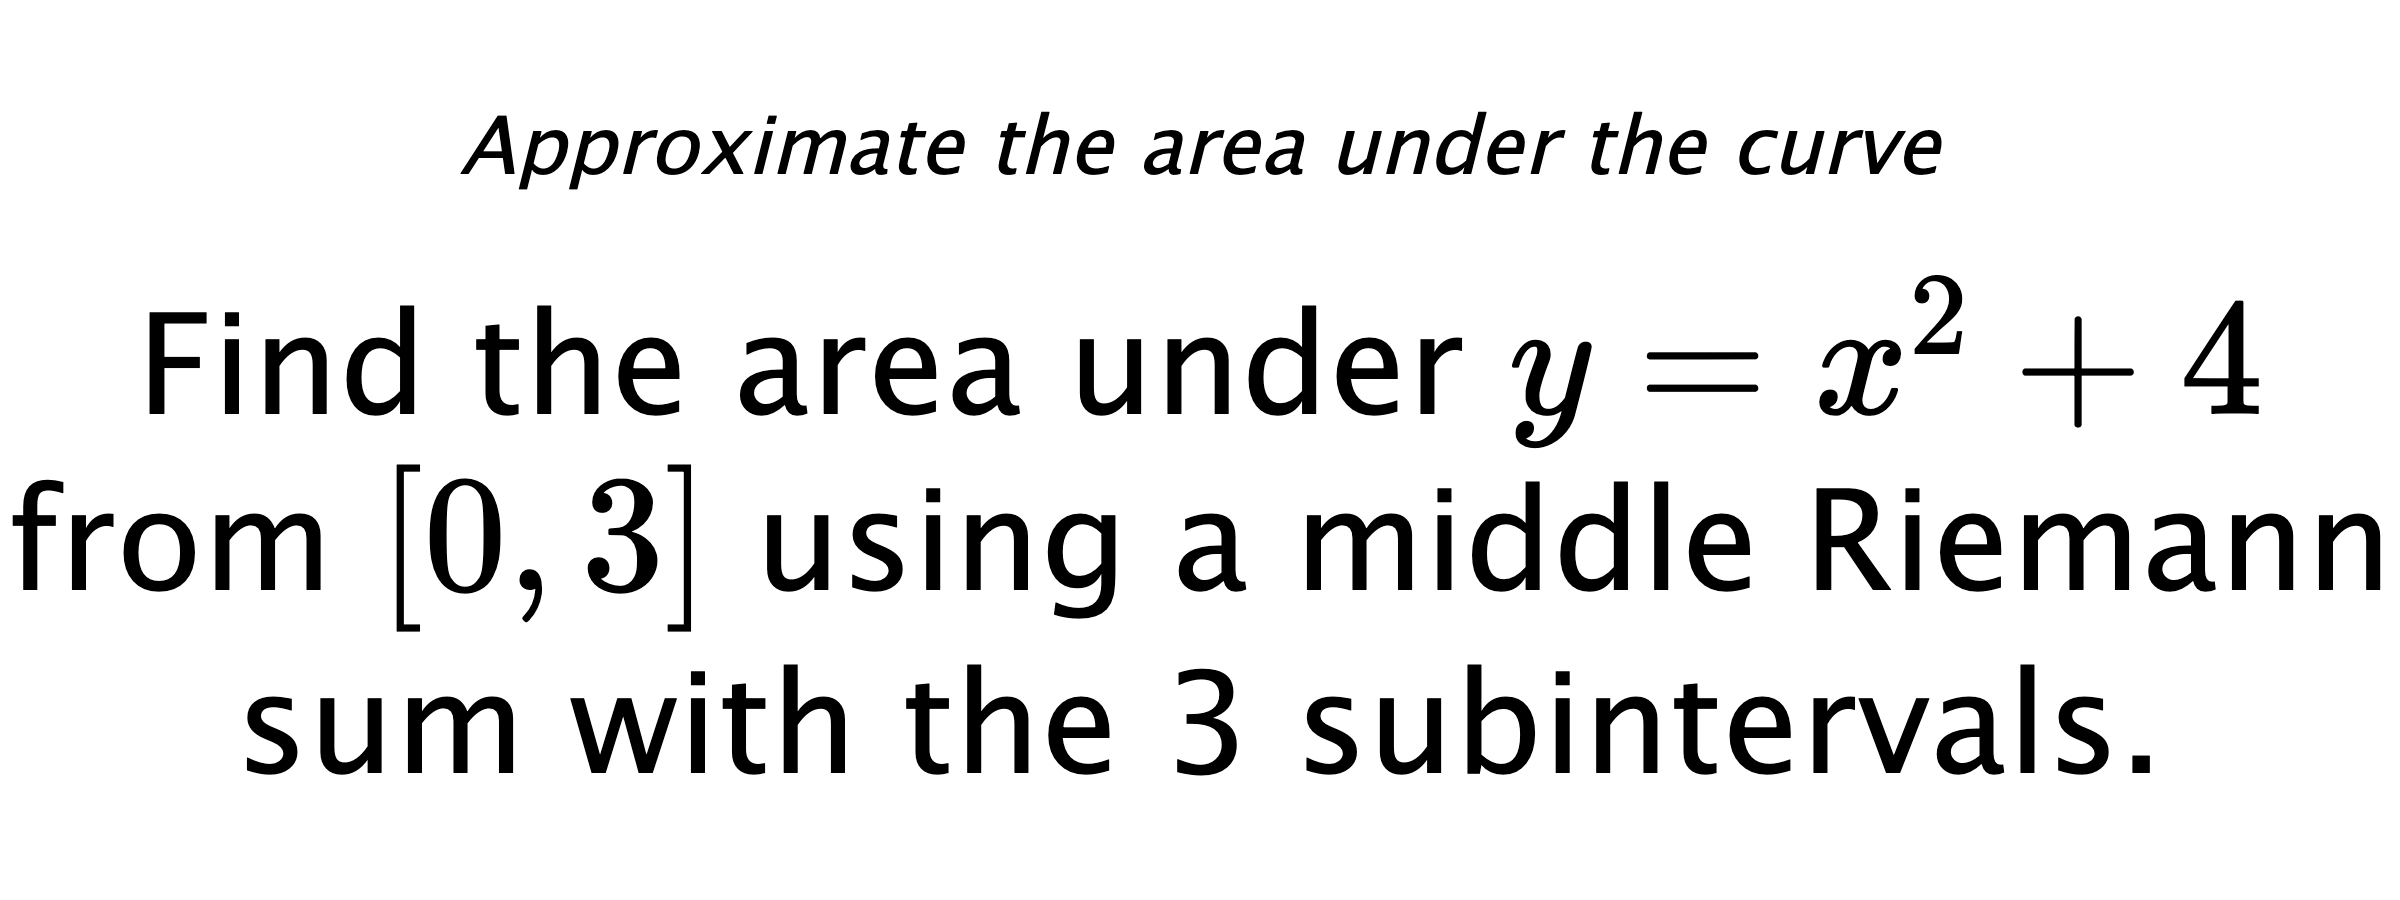 Approximate the area under the curve Find the area under $ y=x^2+4 $ from $ [0,3] $ using a middle Riemann sum with the 3 subintervals.